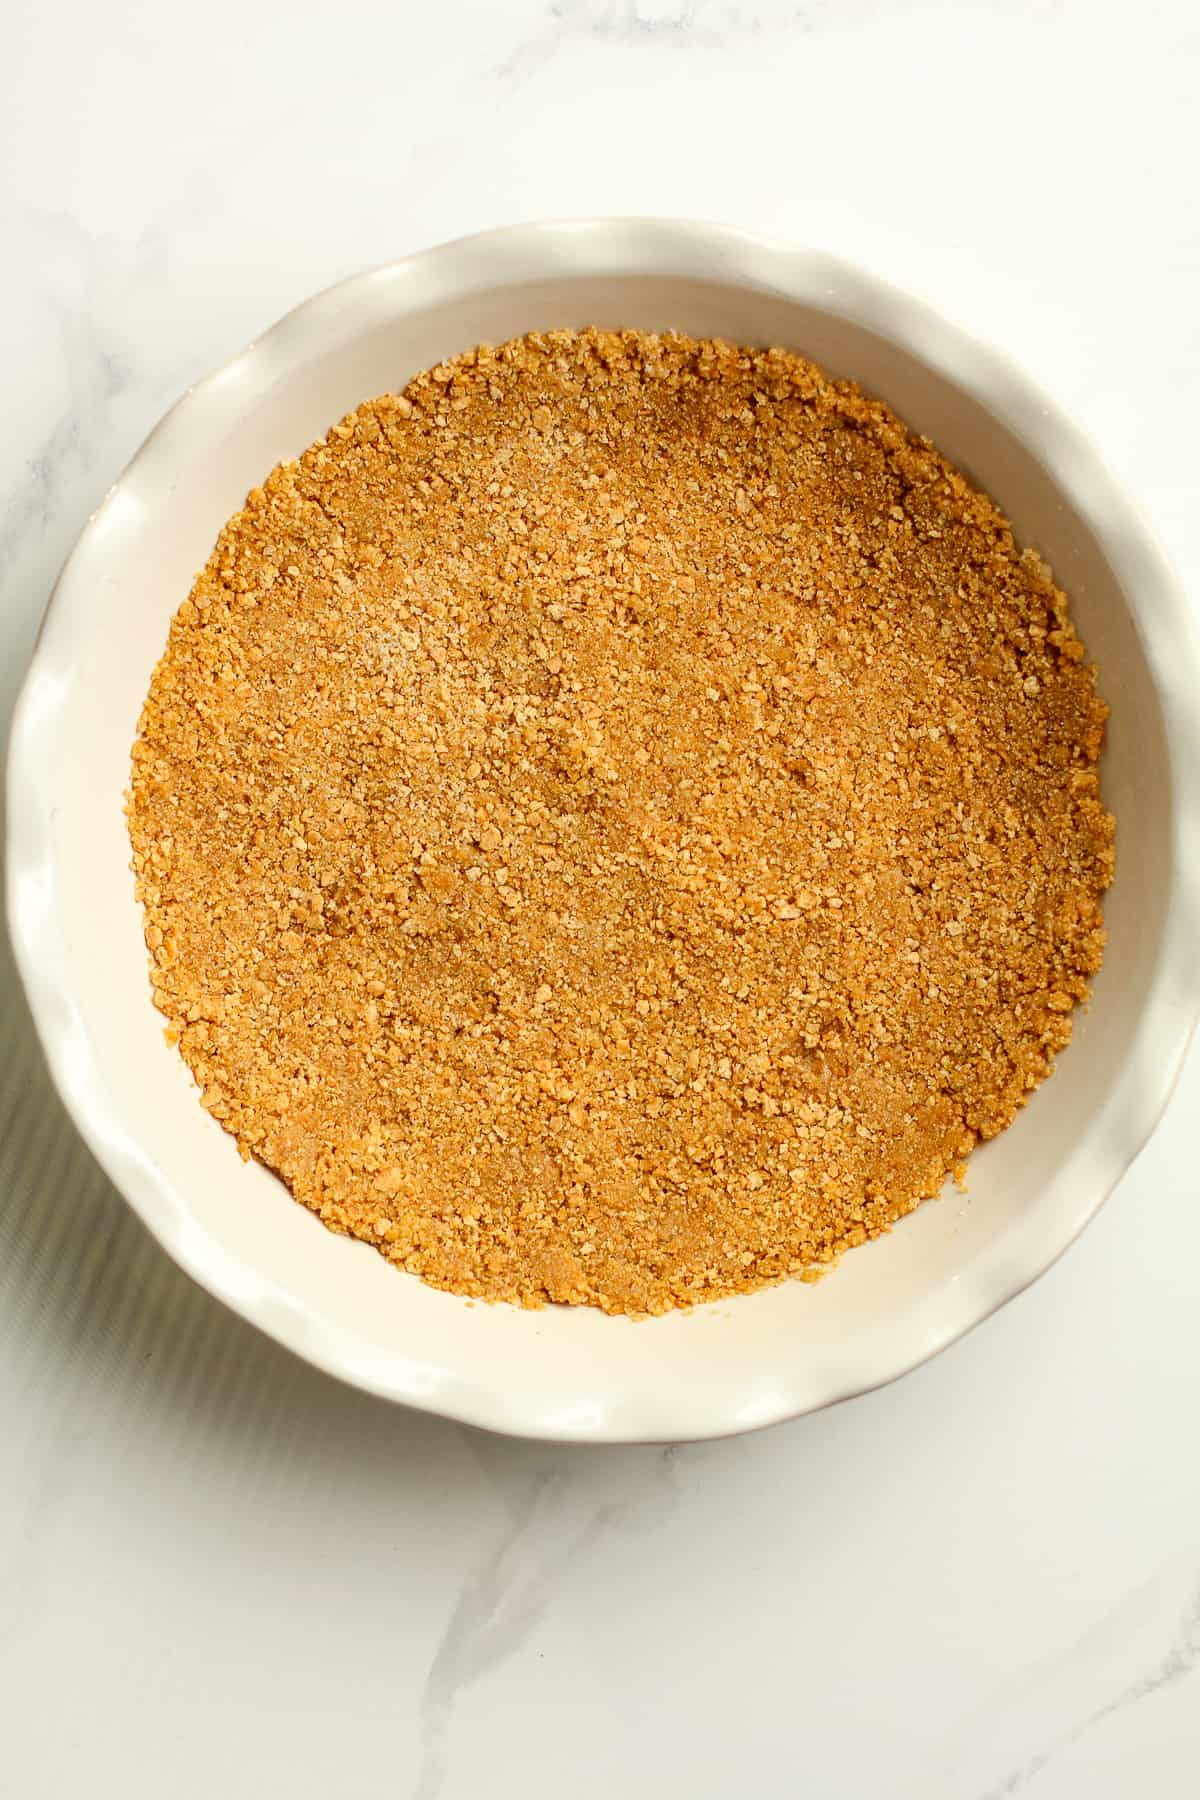 A pie plate with a graham cracker crust.